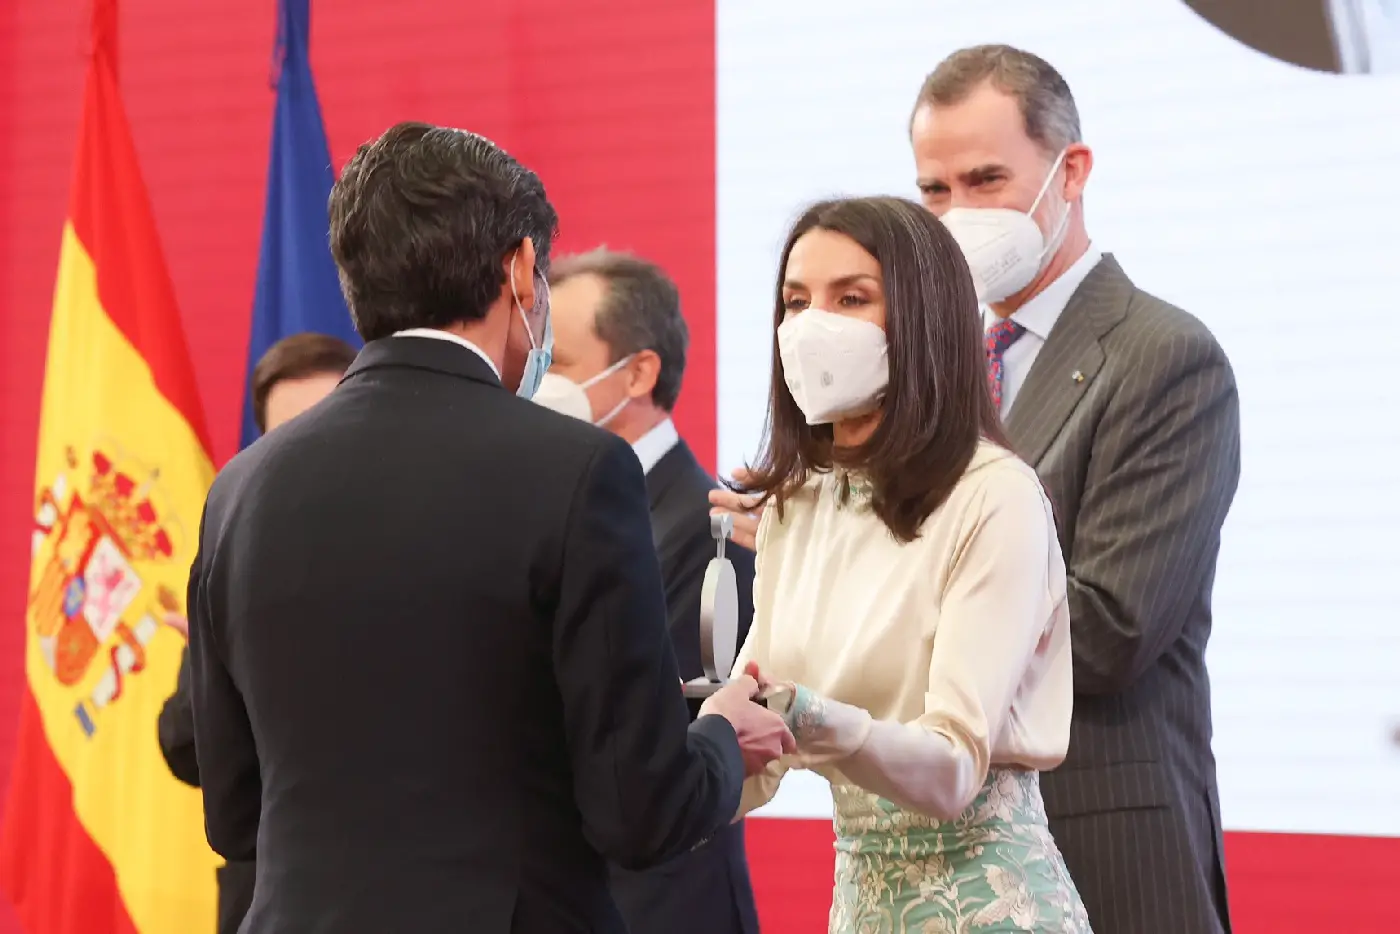 Spanish King Felipe and Queen Letizia today presented the Accreditation to the newly appointed Ambassadors of Spain